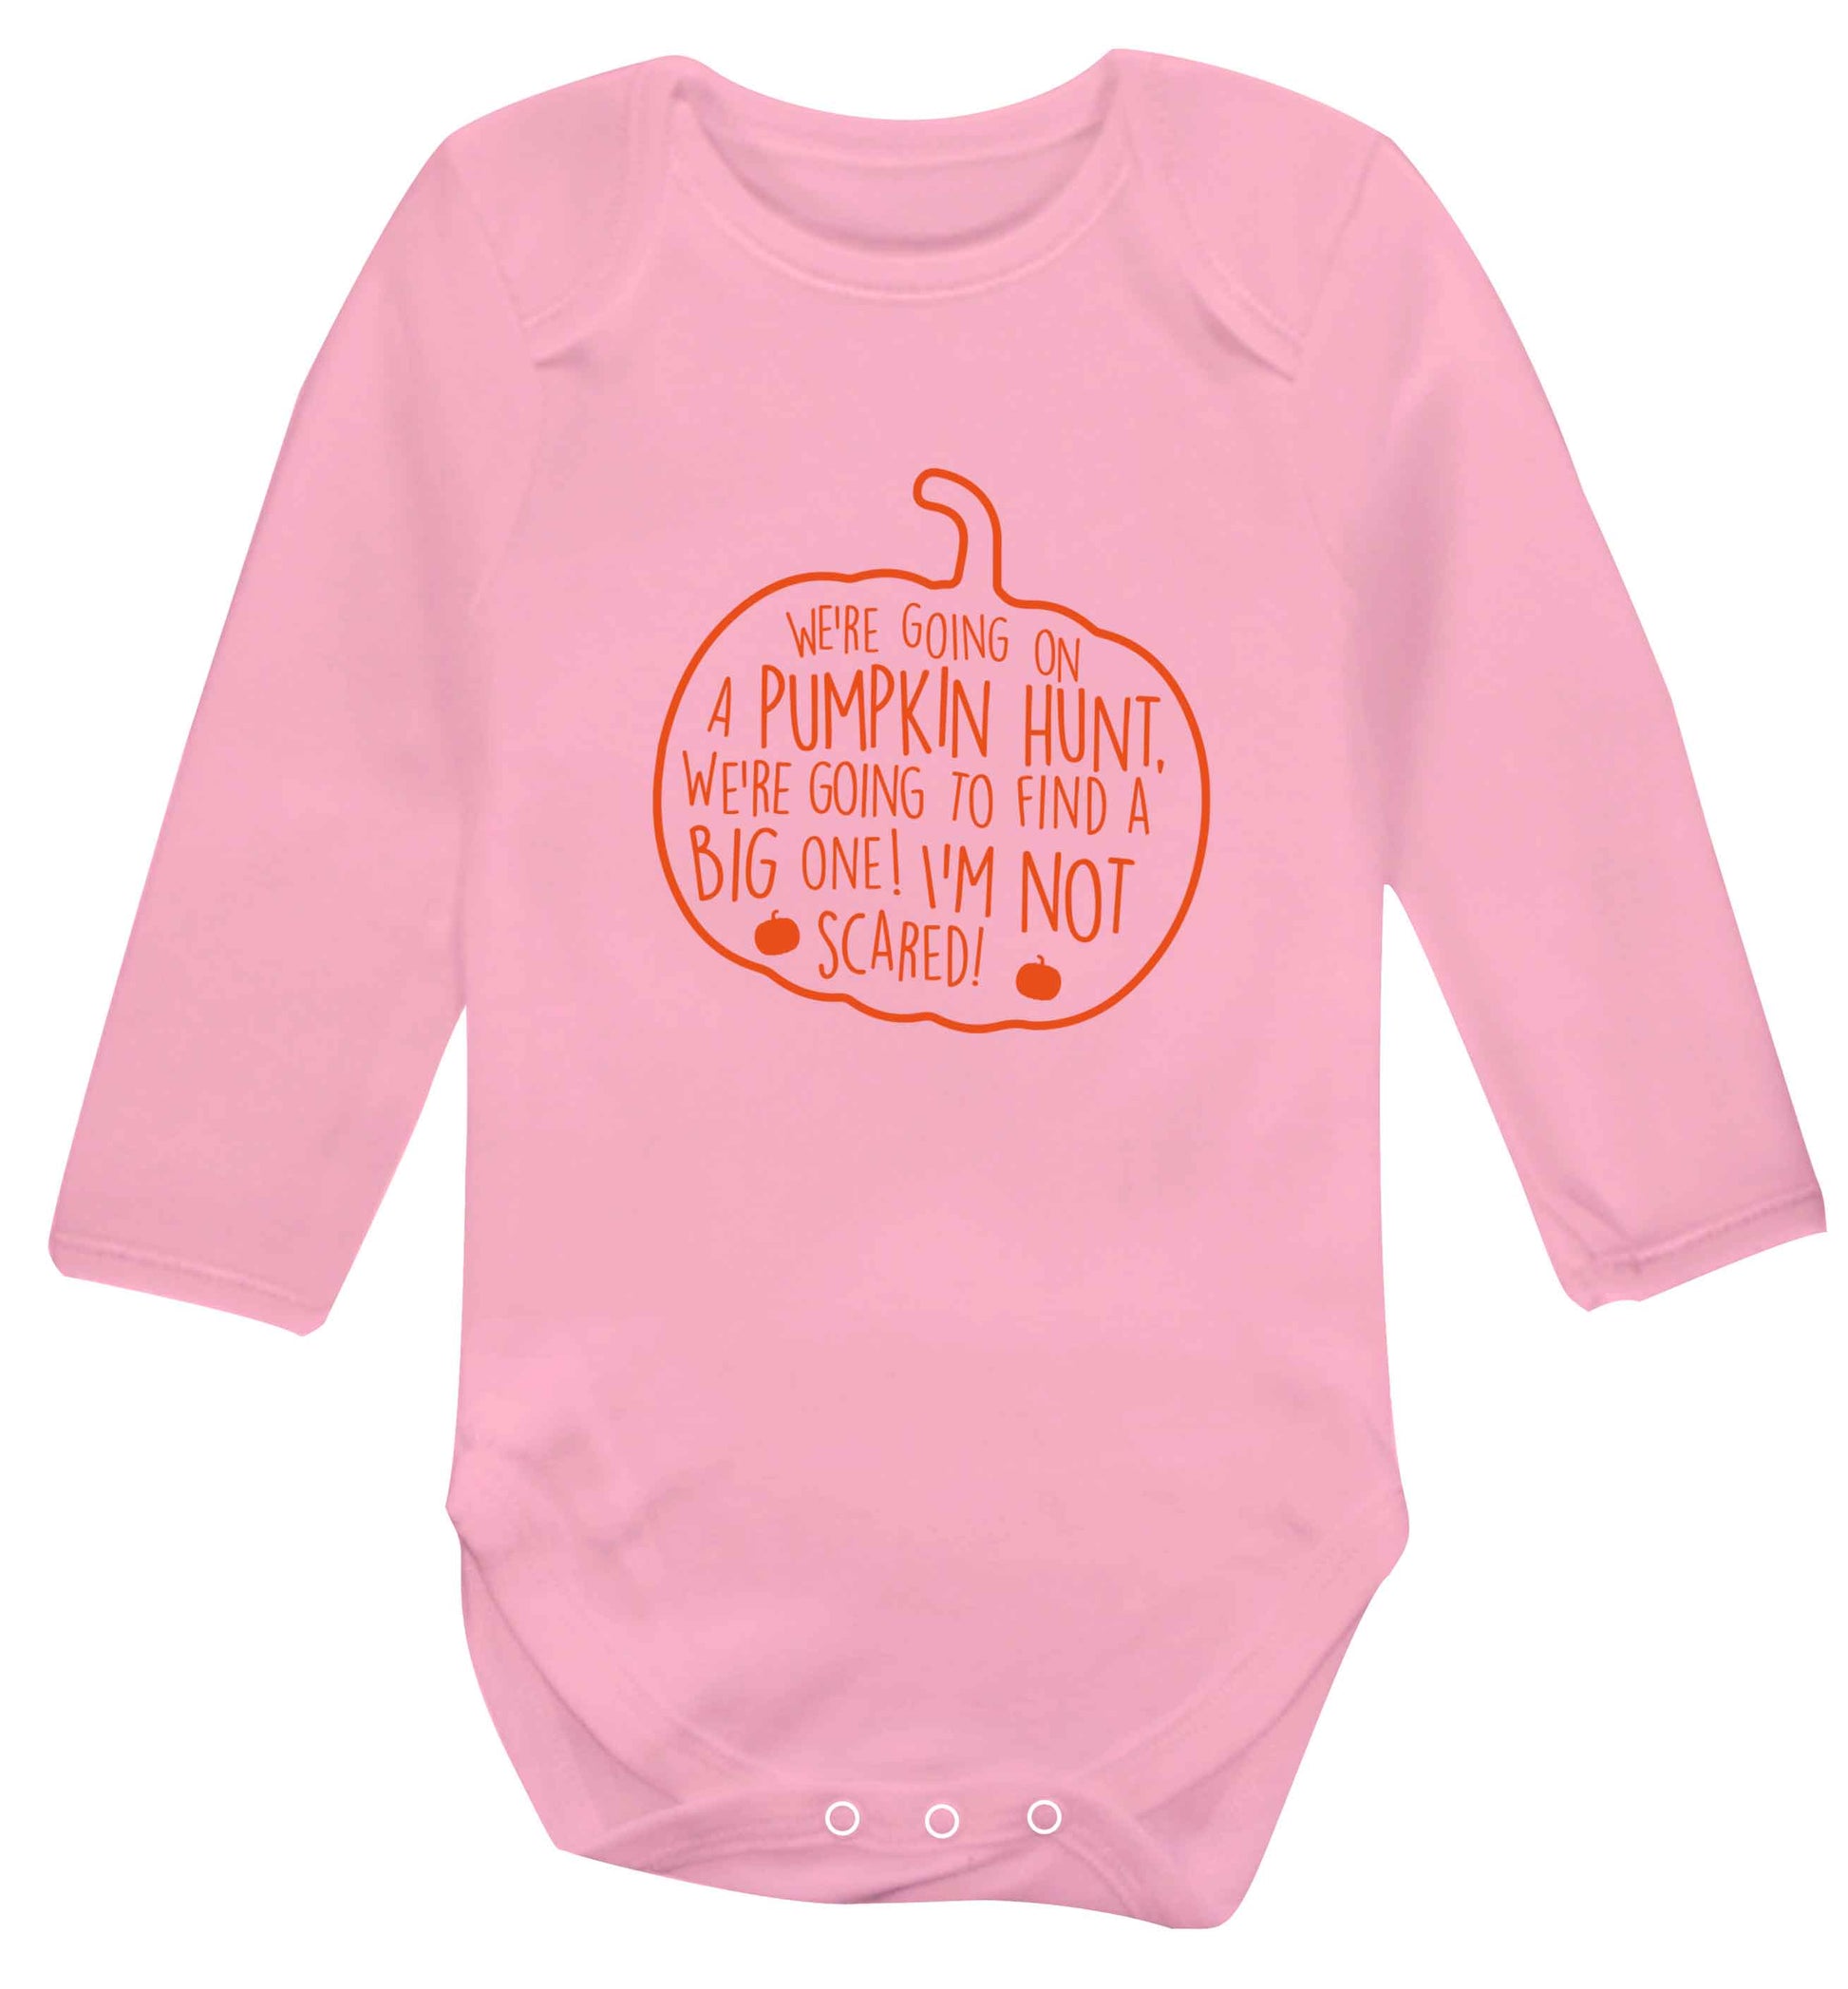 We're going on a pumpkin hunt baby vest long sleeved pale pink 6-12 months